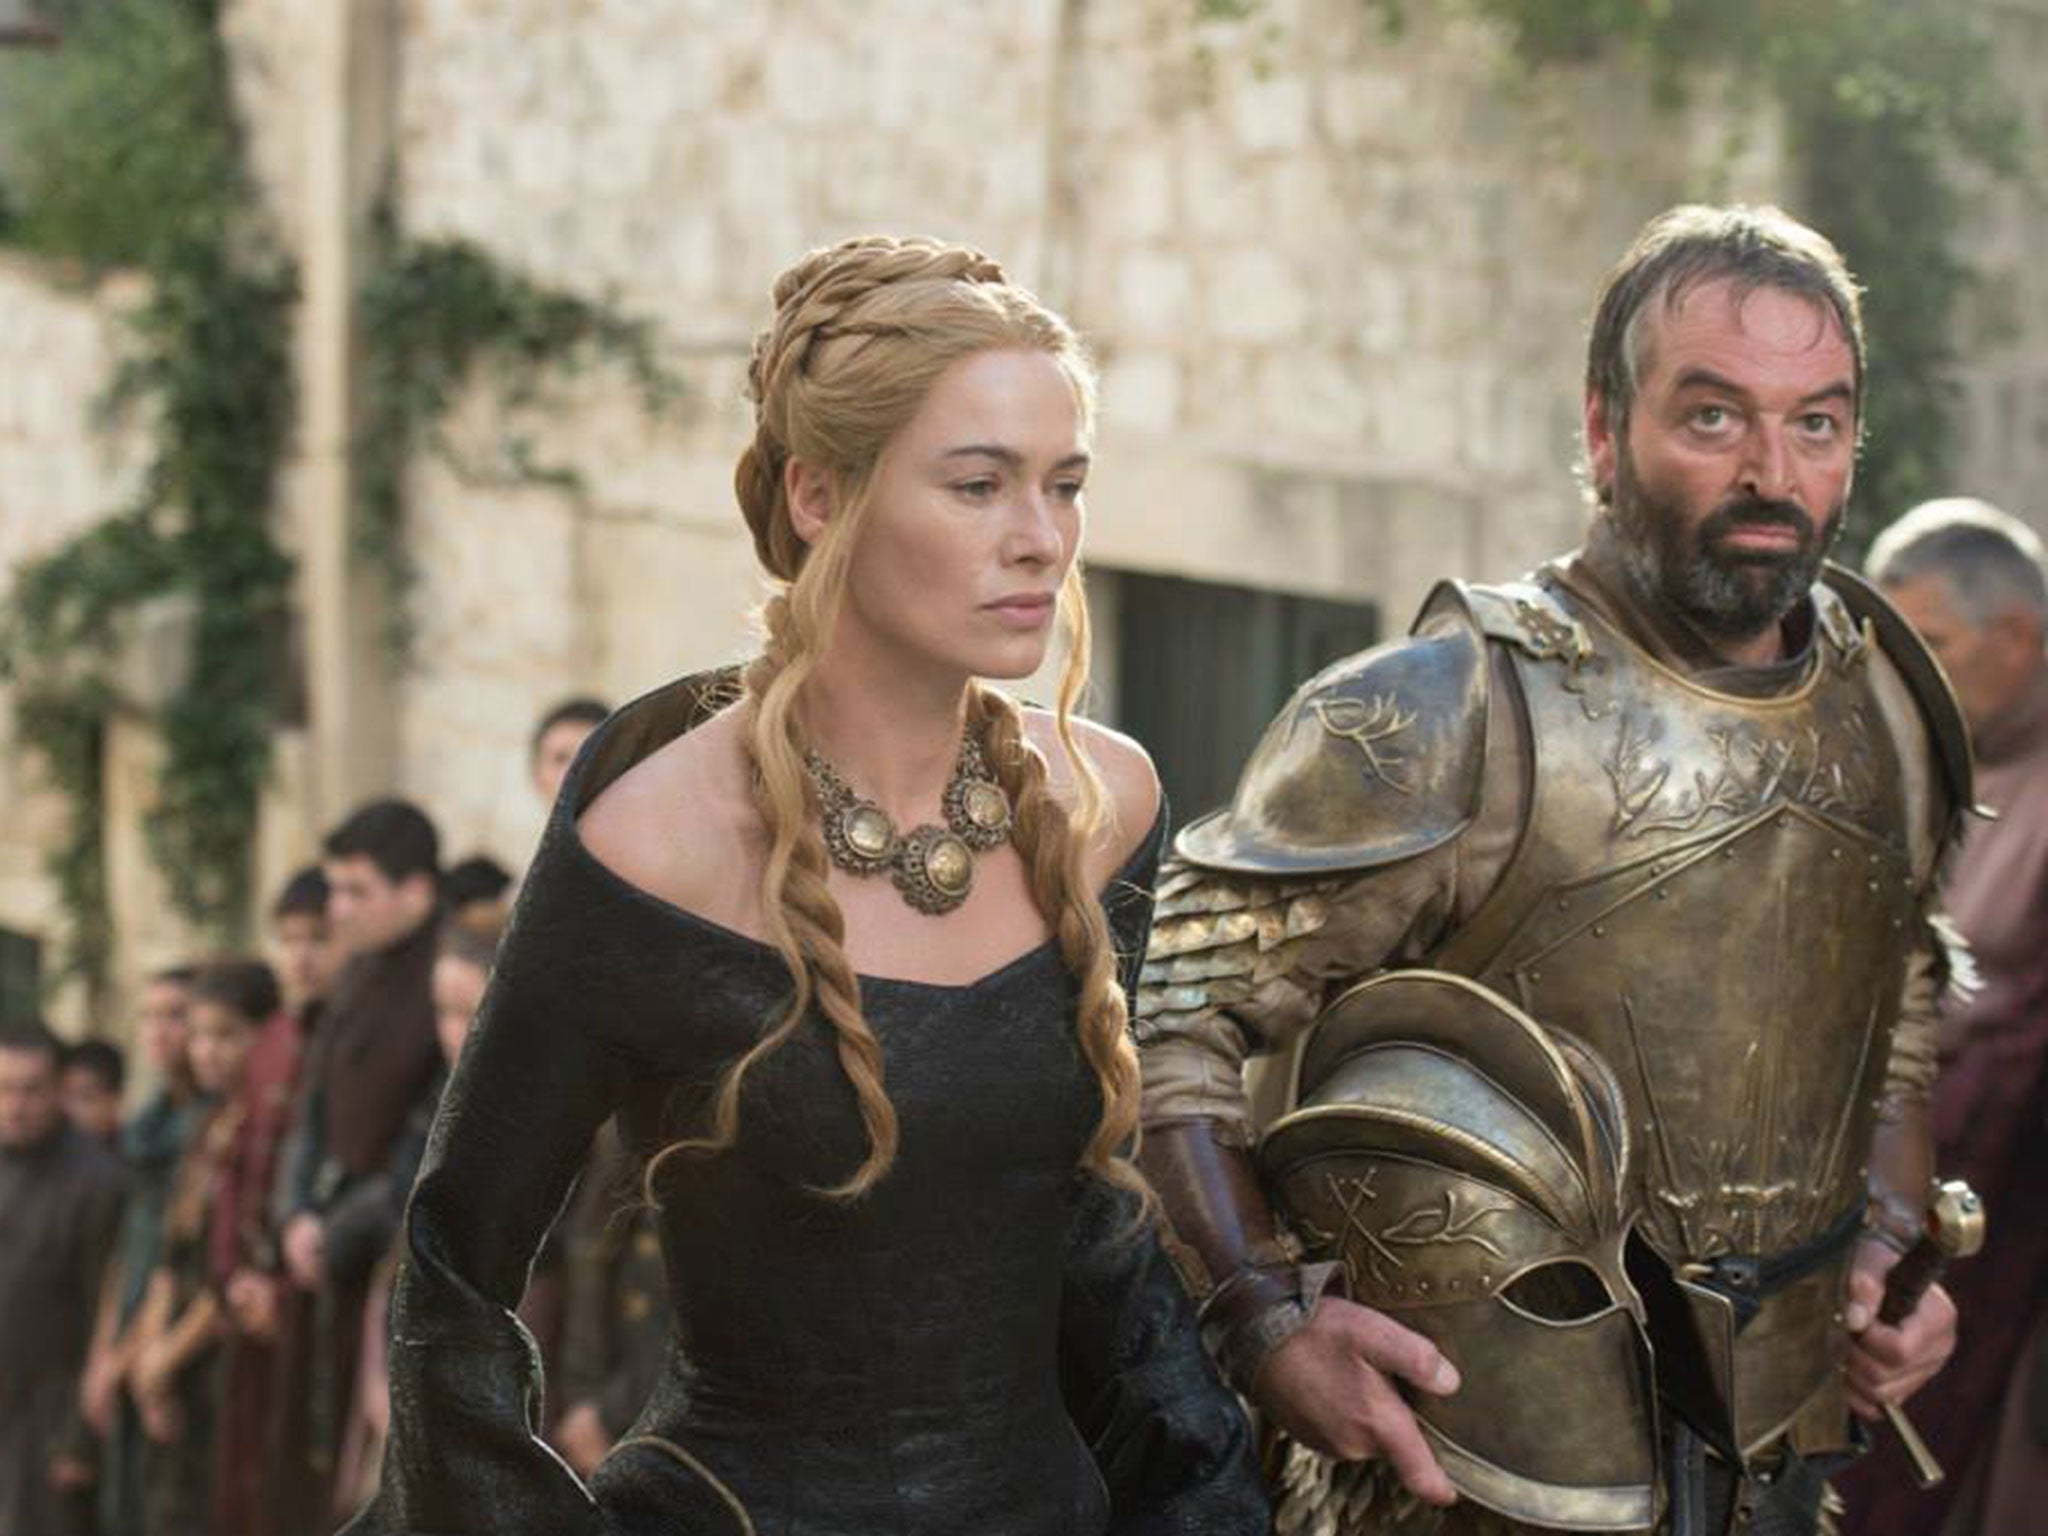 Lena Headey looks very serious as Cersei Lannister in Game of Thrones